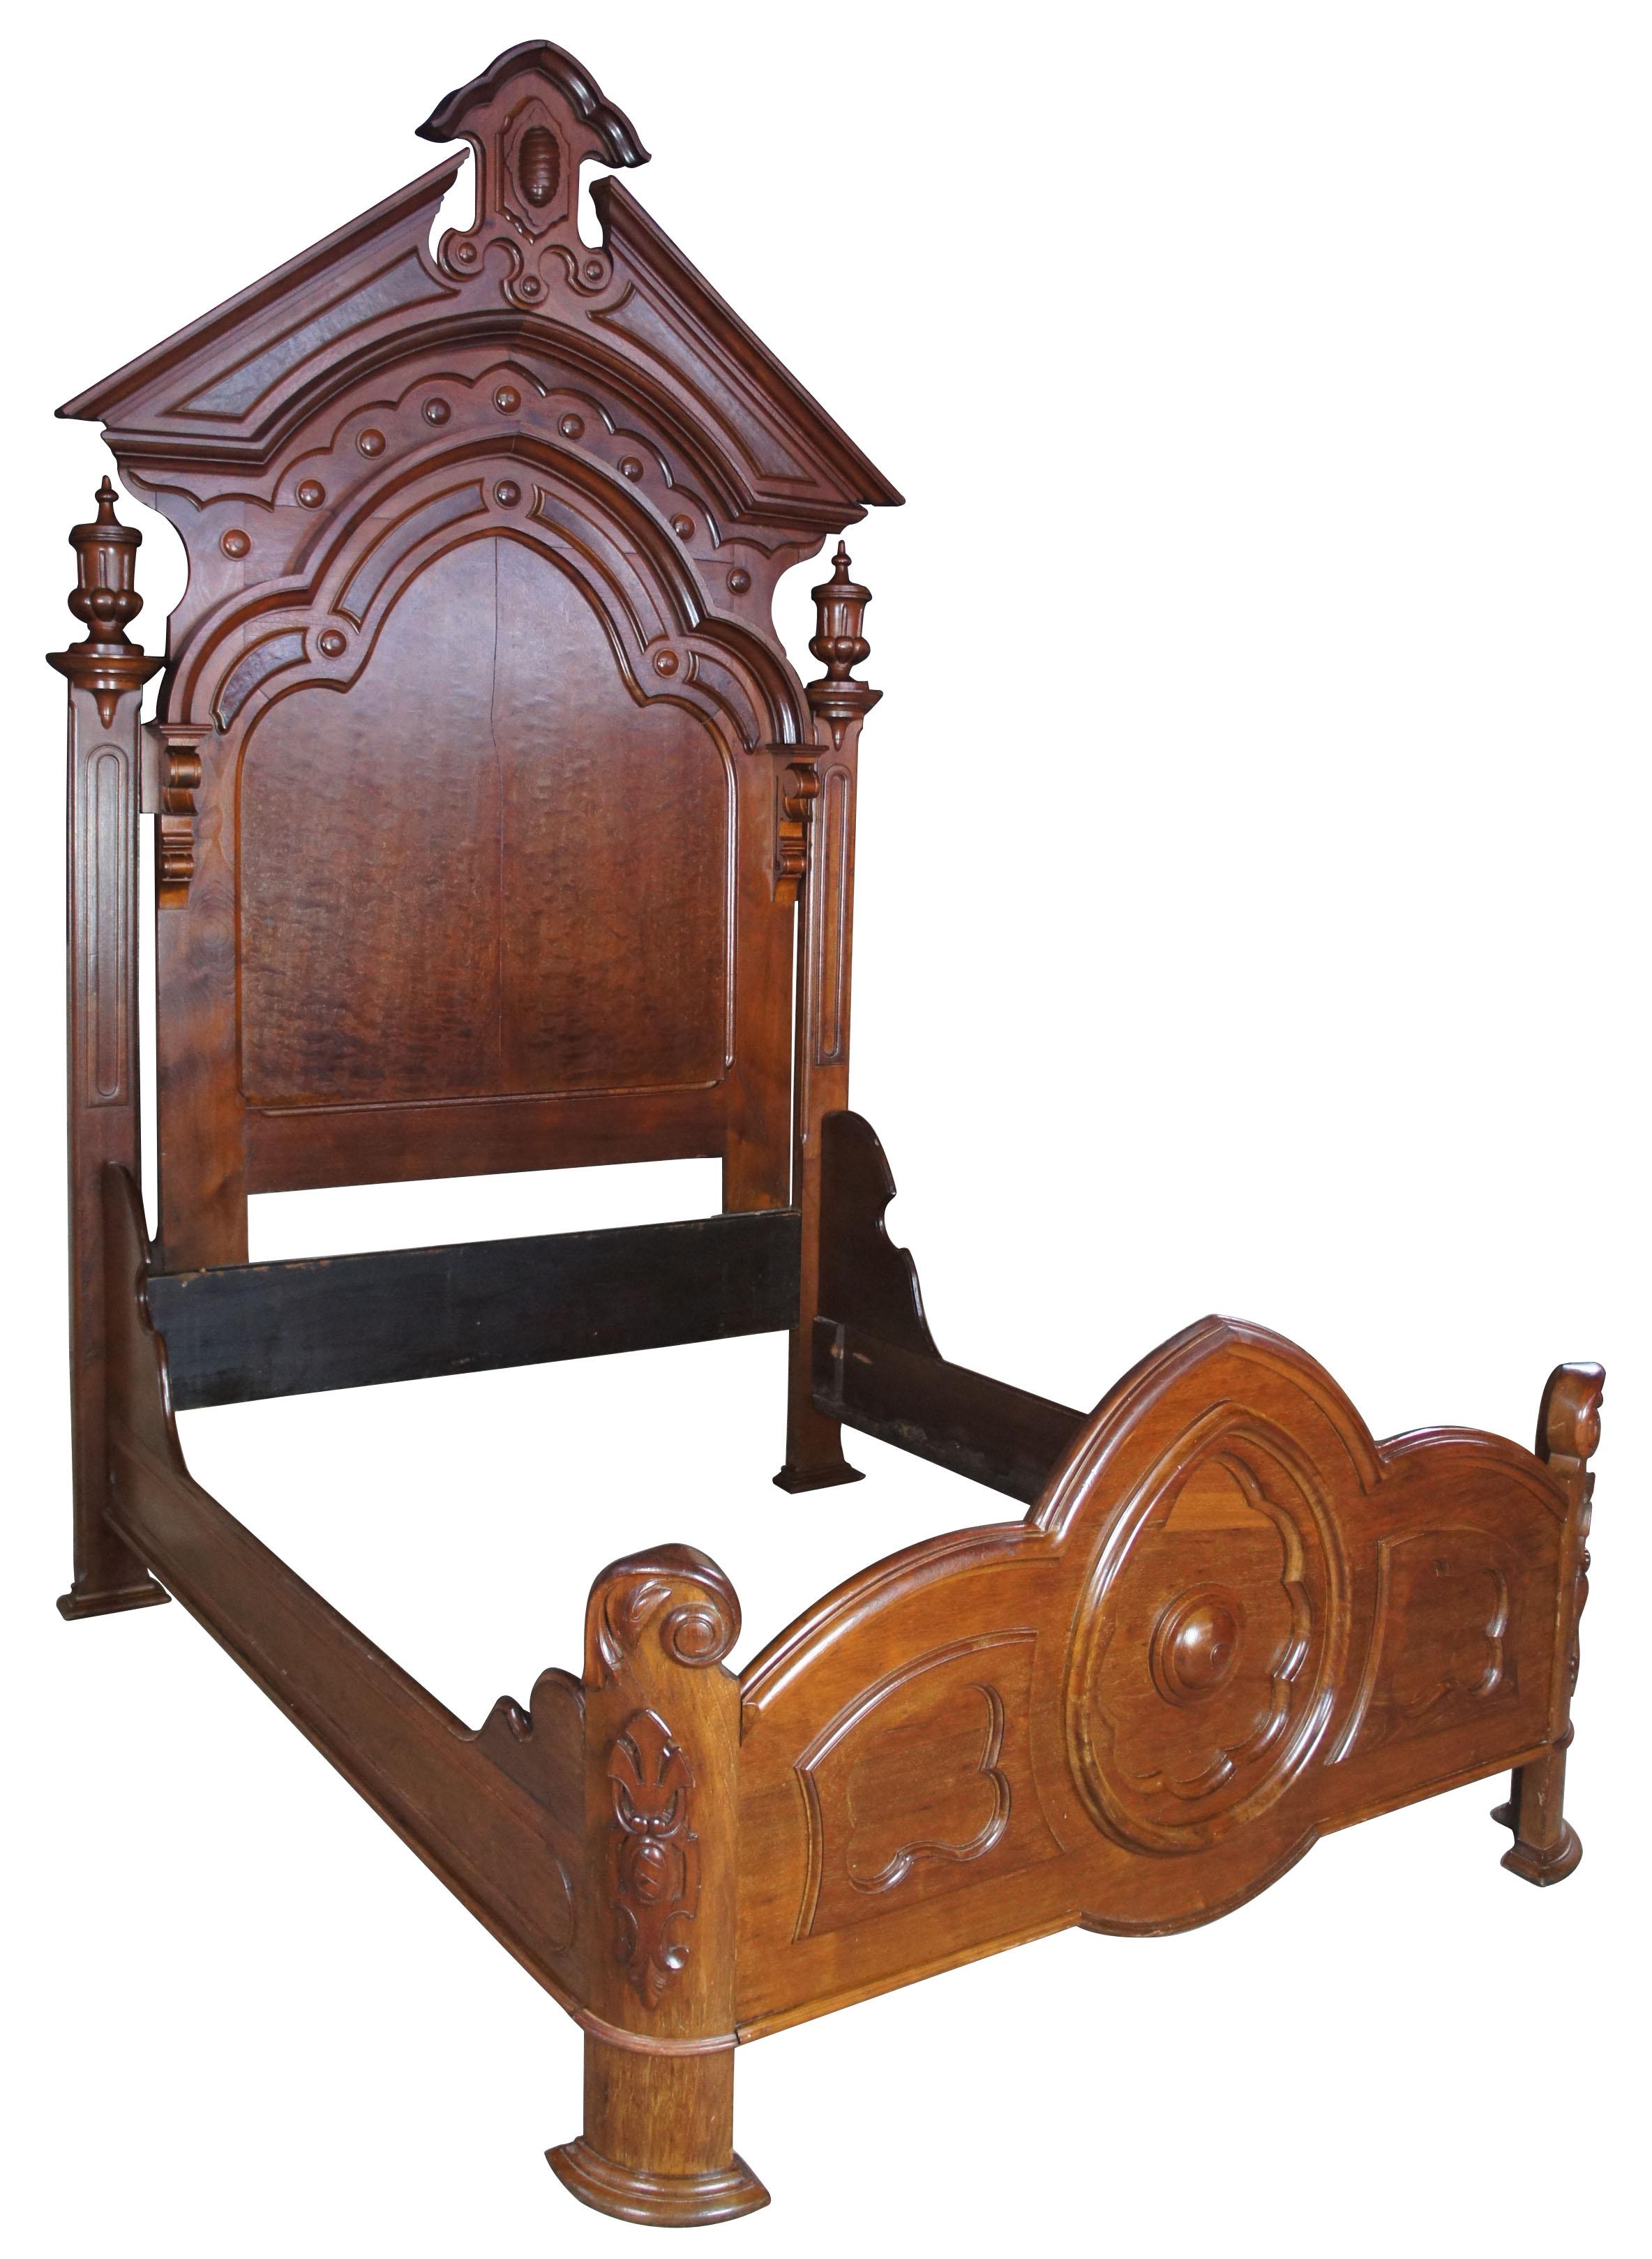 Victorian bedroom set.
Includes;
Gentleman's dresser
Lincoln style bed
Washstand
#24788

Gentleman's dresser
 Made from walnut with burled trim, carved handles, and other ornate accents. Features a grand mirror with pierced back, shelves and